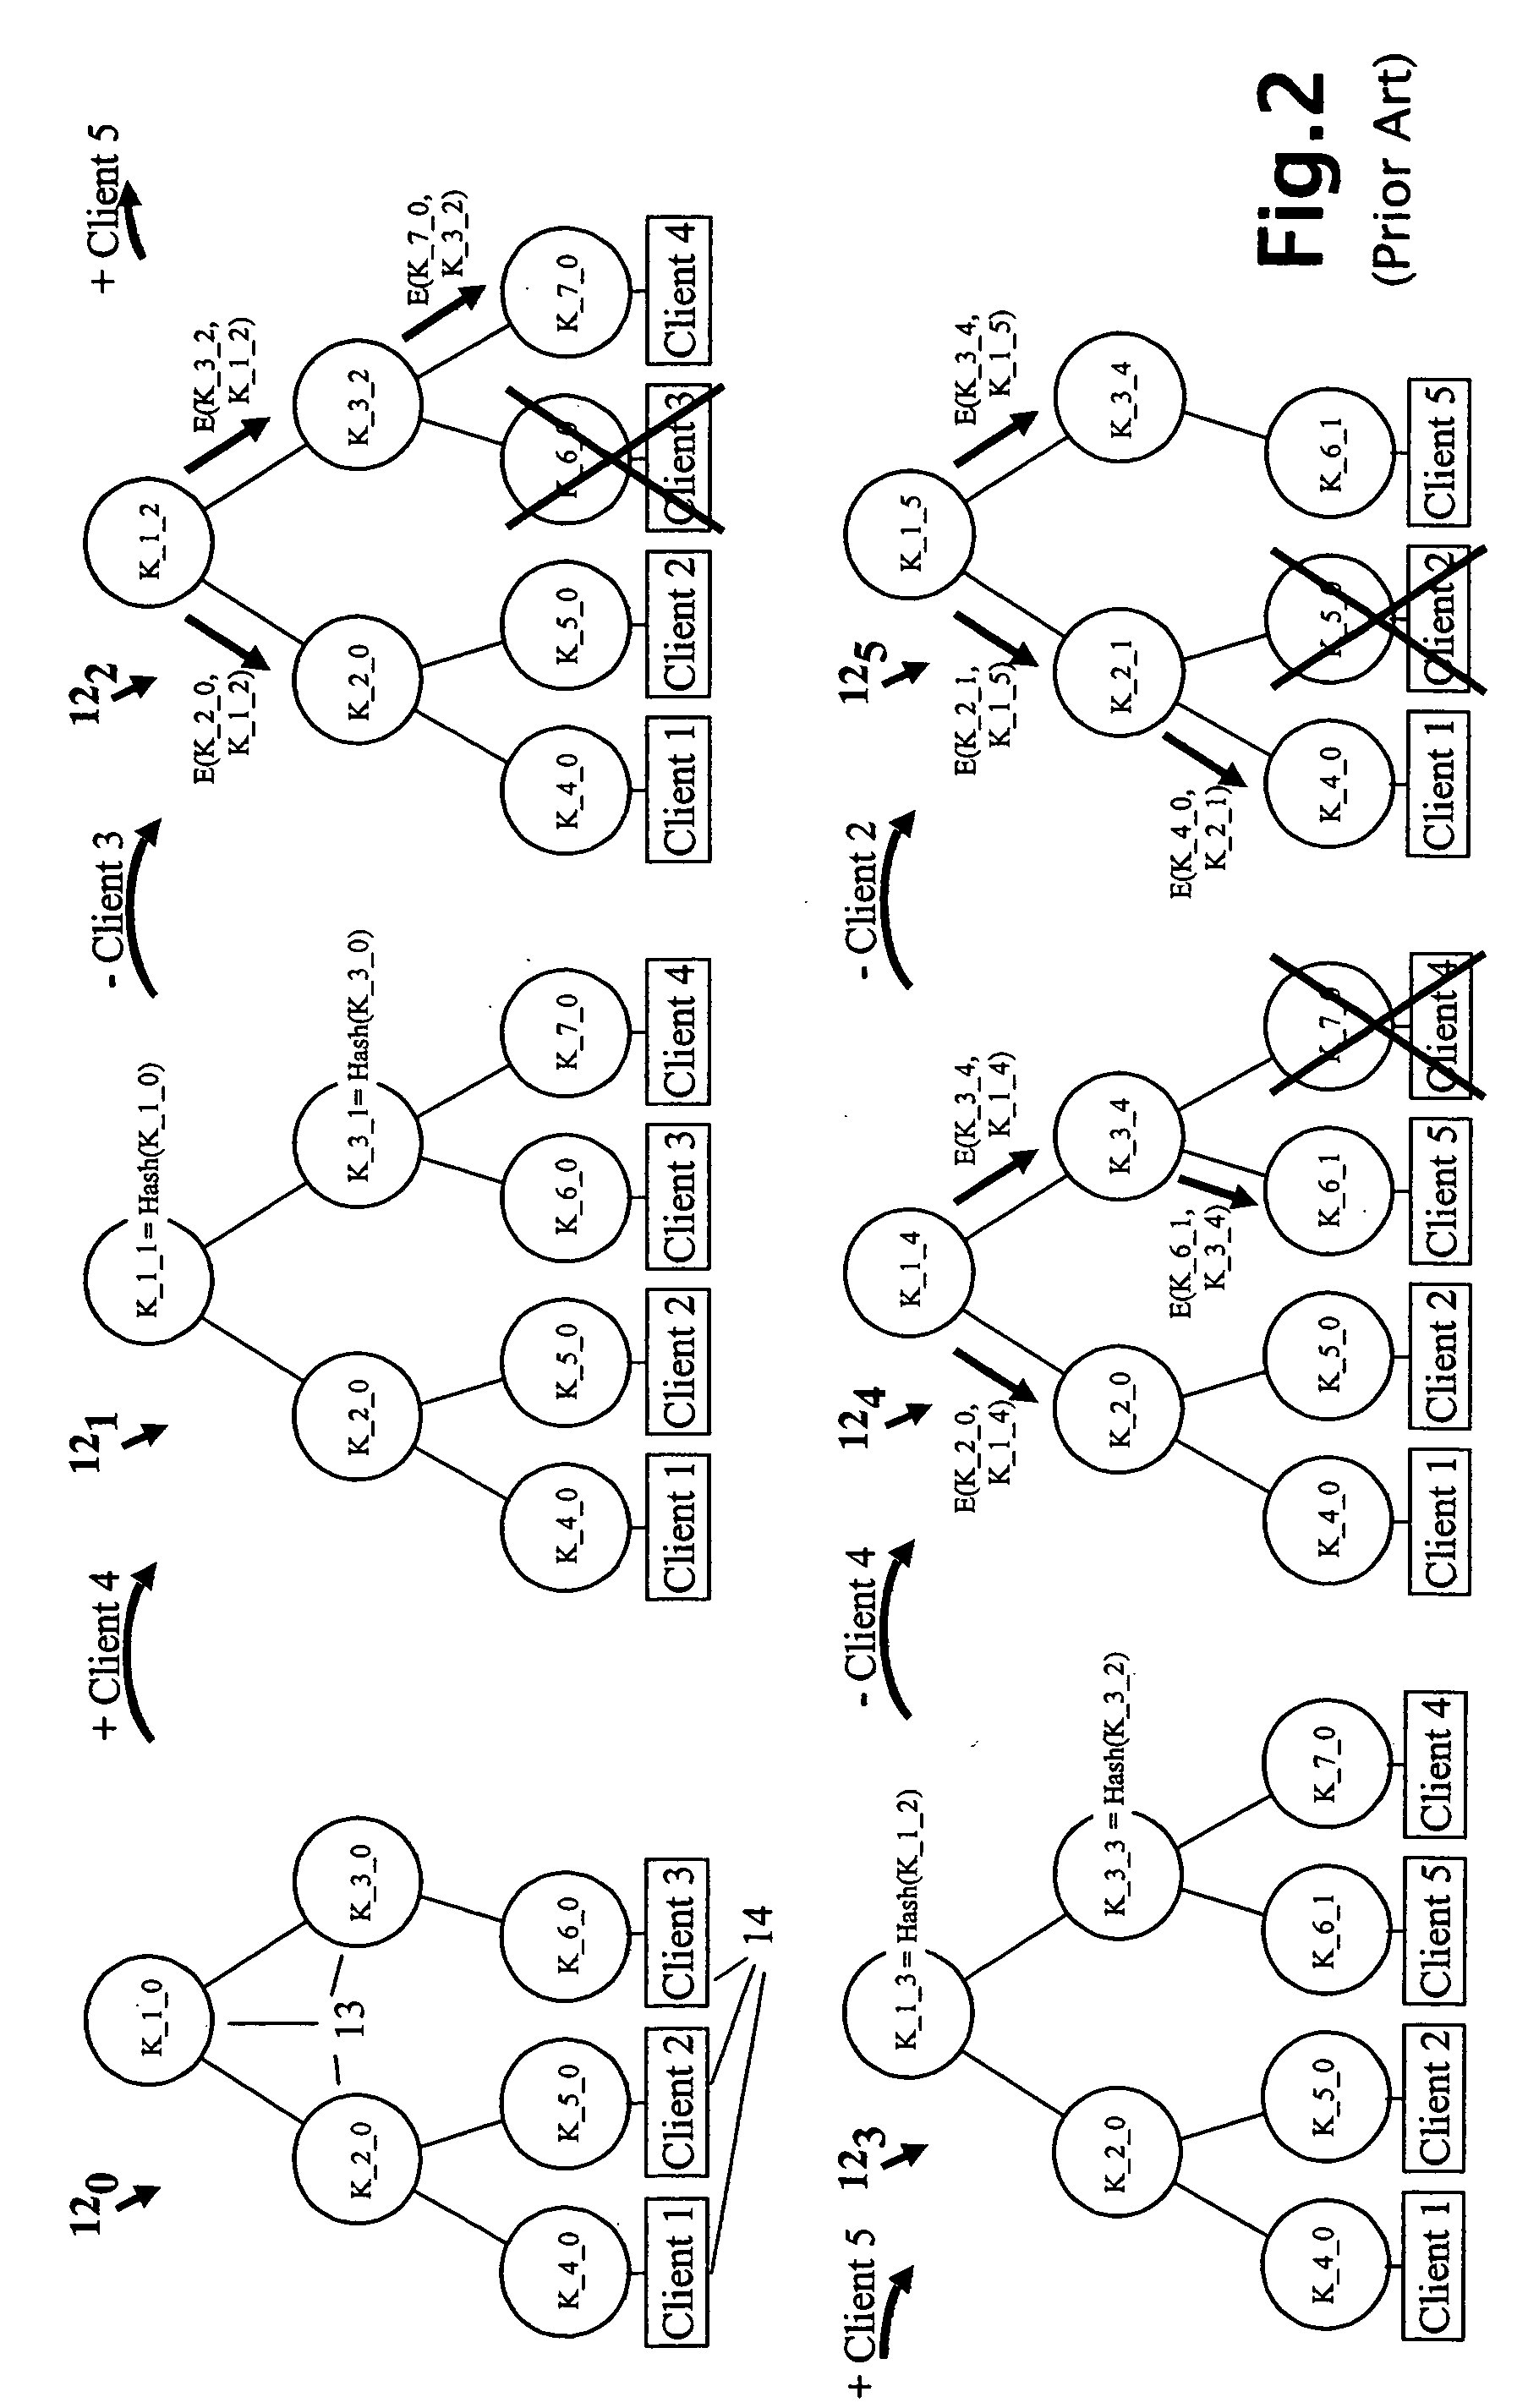 Cryptographic key update management method and apparatus